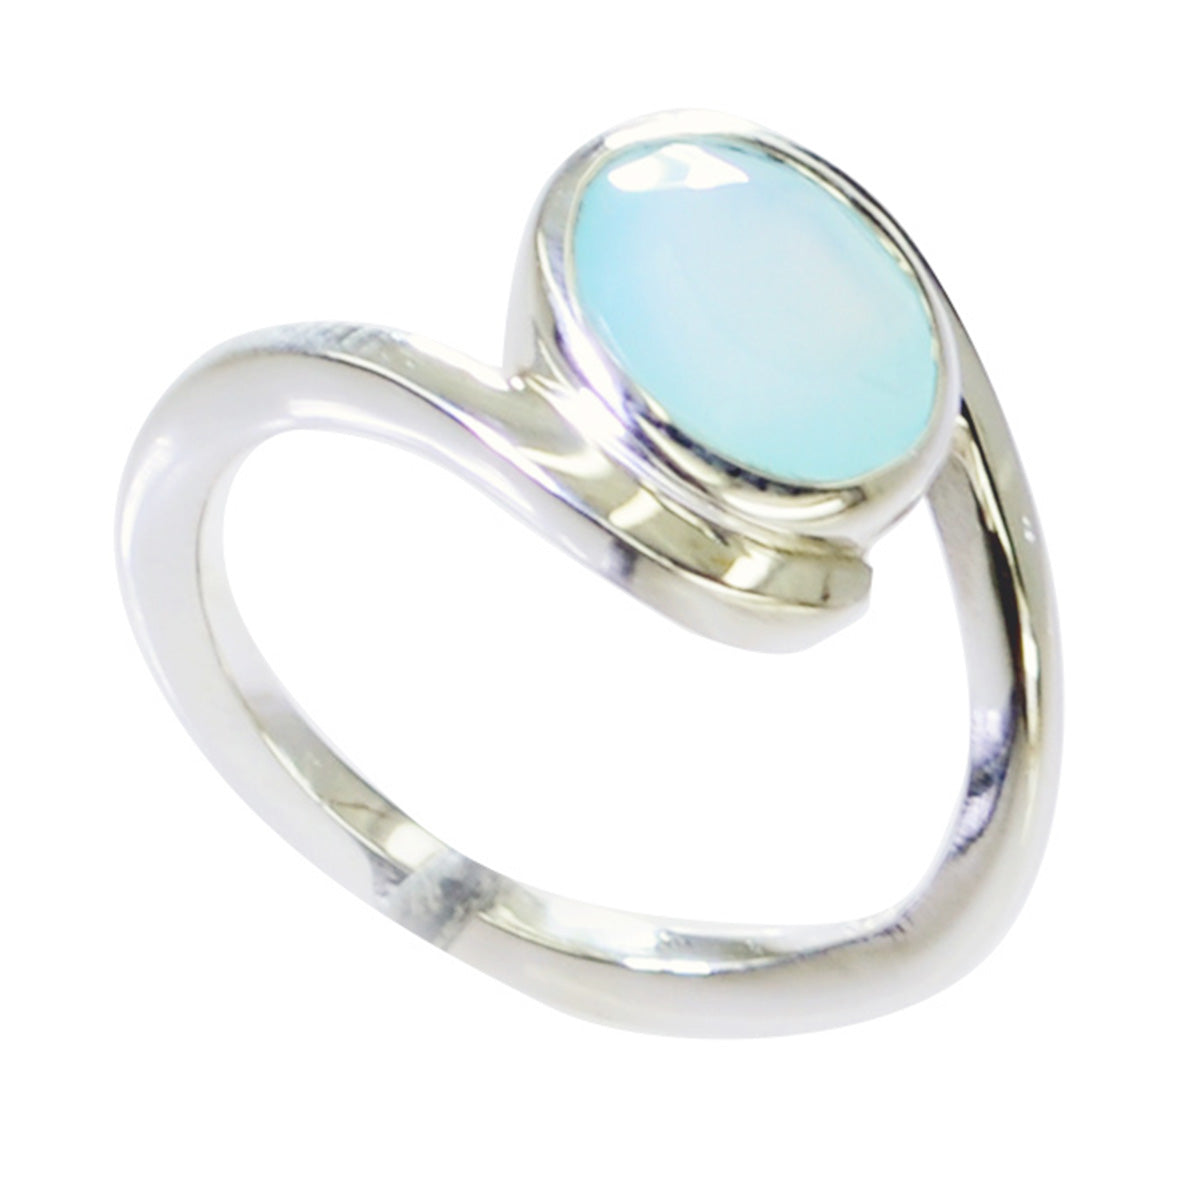 Magnificent Gem Chalcedony 925 Silver Ring Over The Door Jewelry Armoire